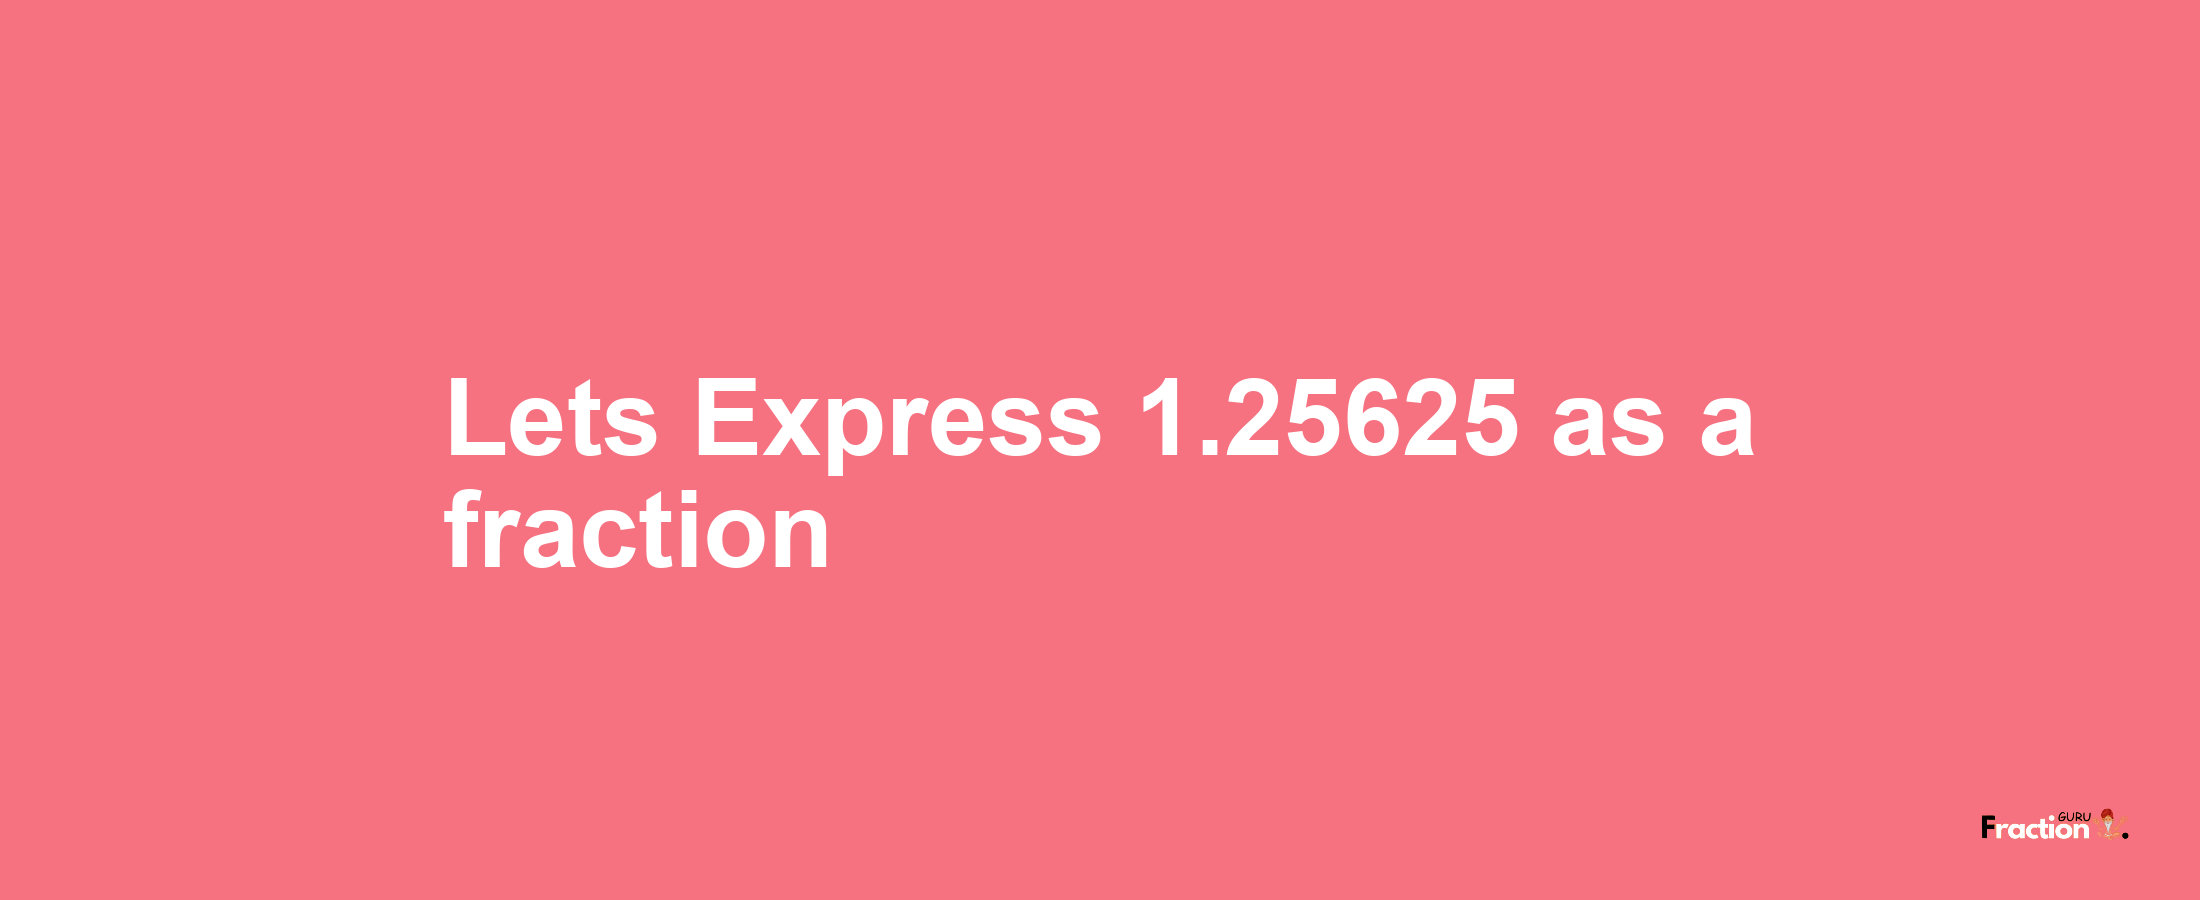 Lets Express 1.25625 as afraction